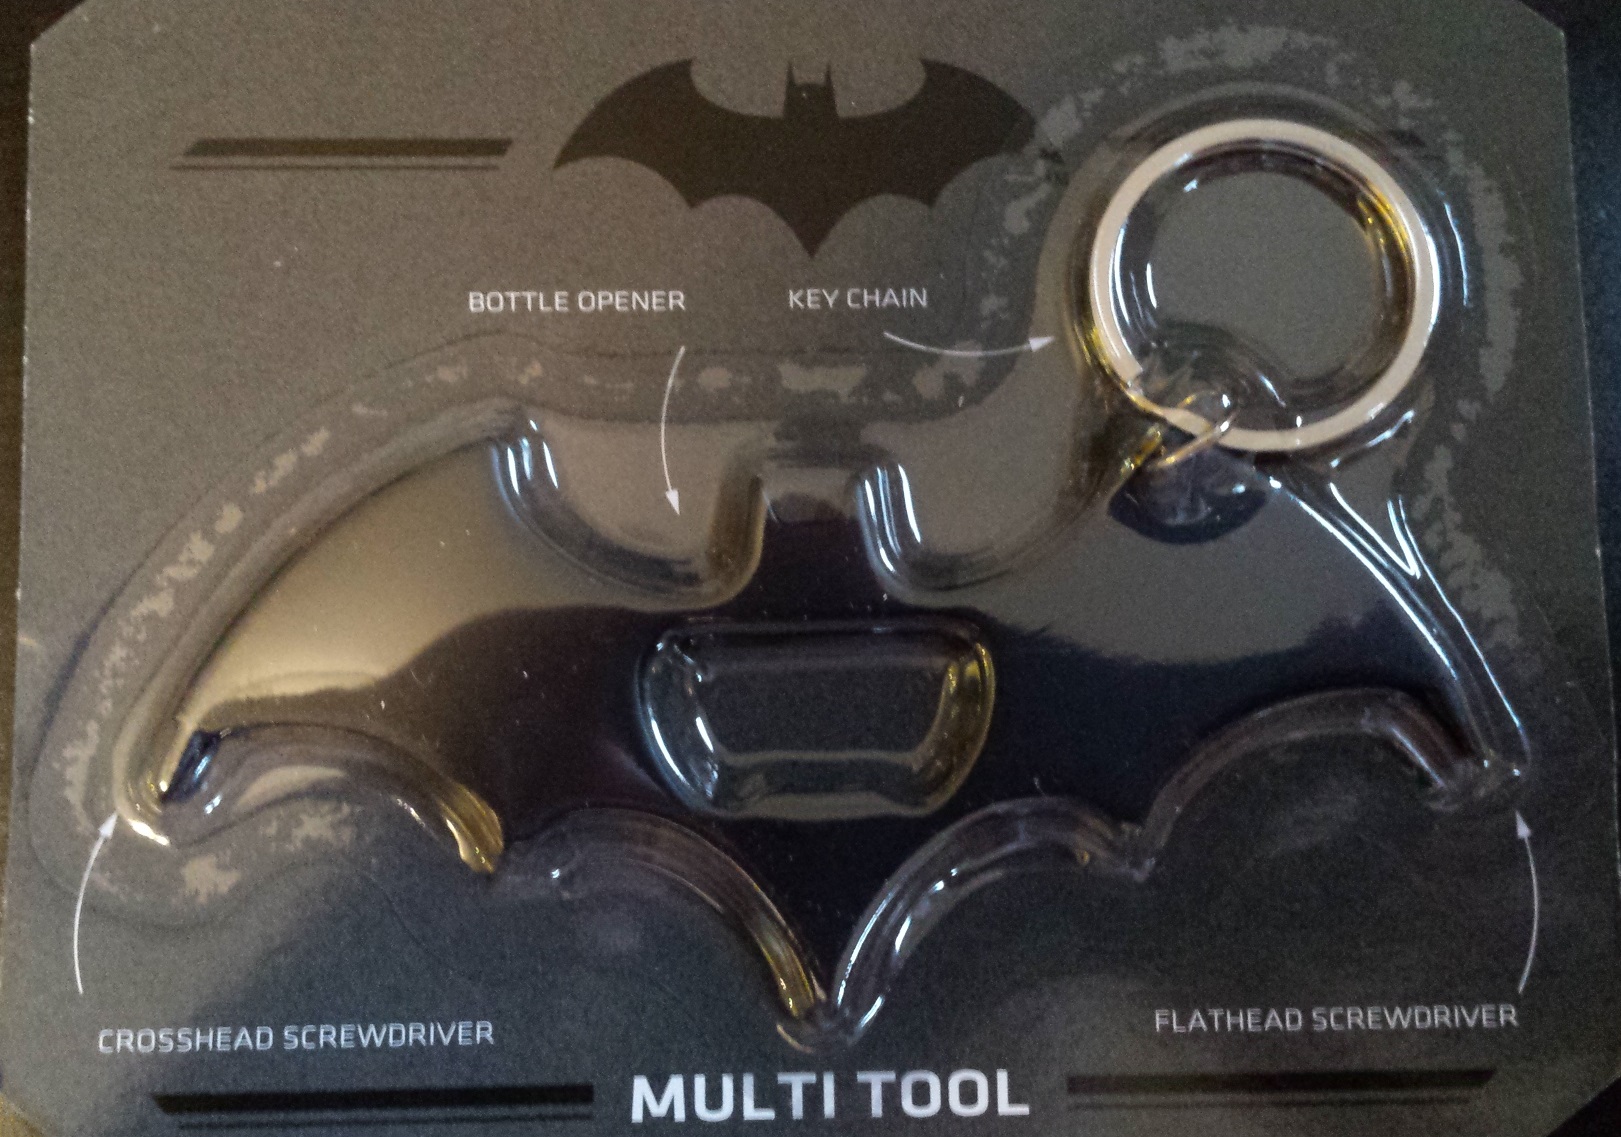 July loot crate is super partly because of this batman multi tool